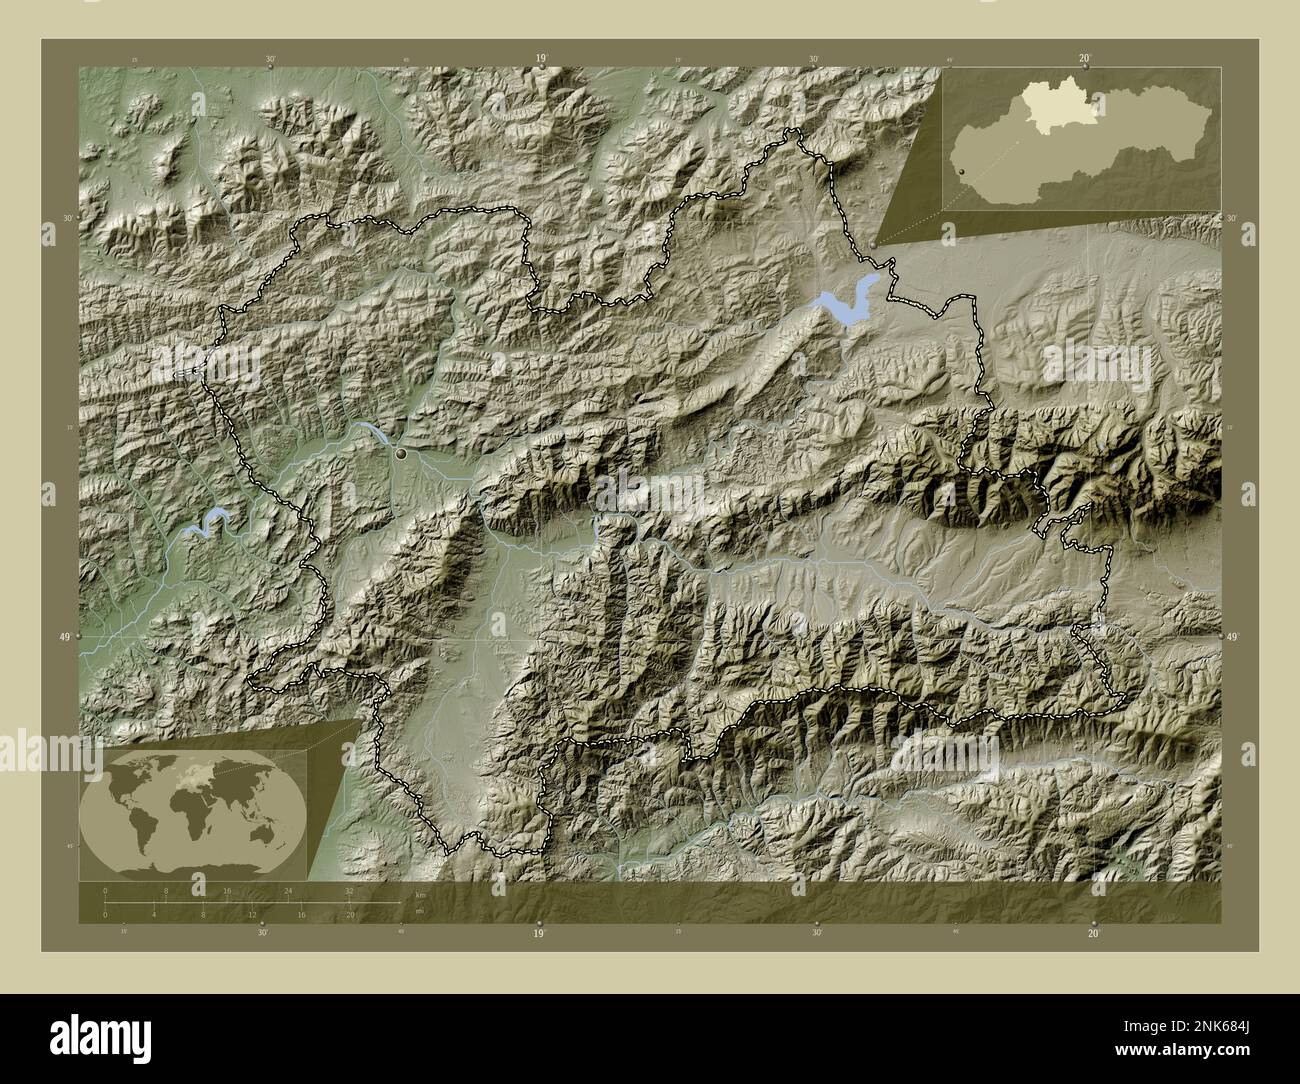 Zilinsky Region Of Slovakia Elevation Map Colored In Wiki Style With